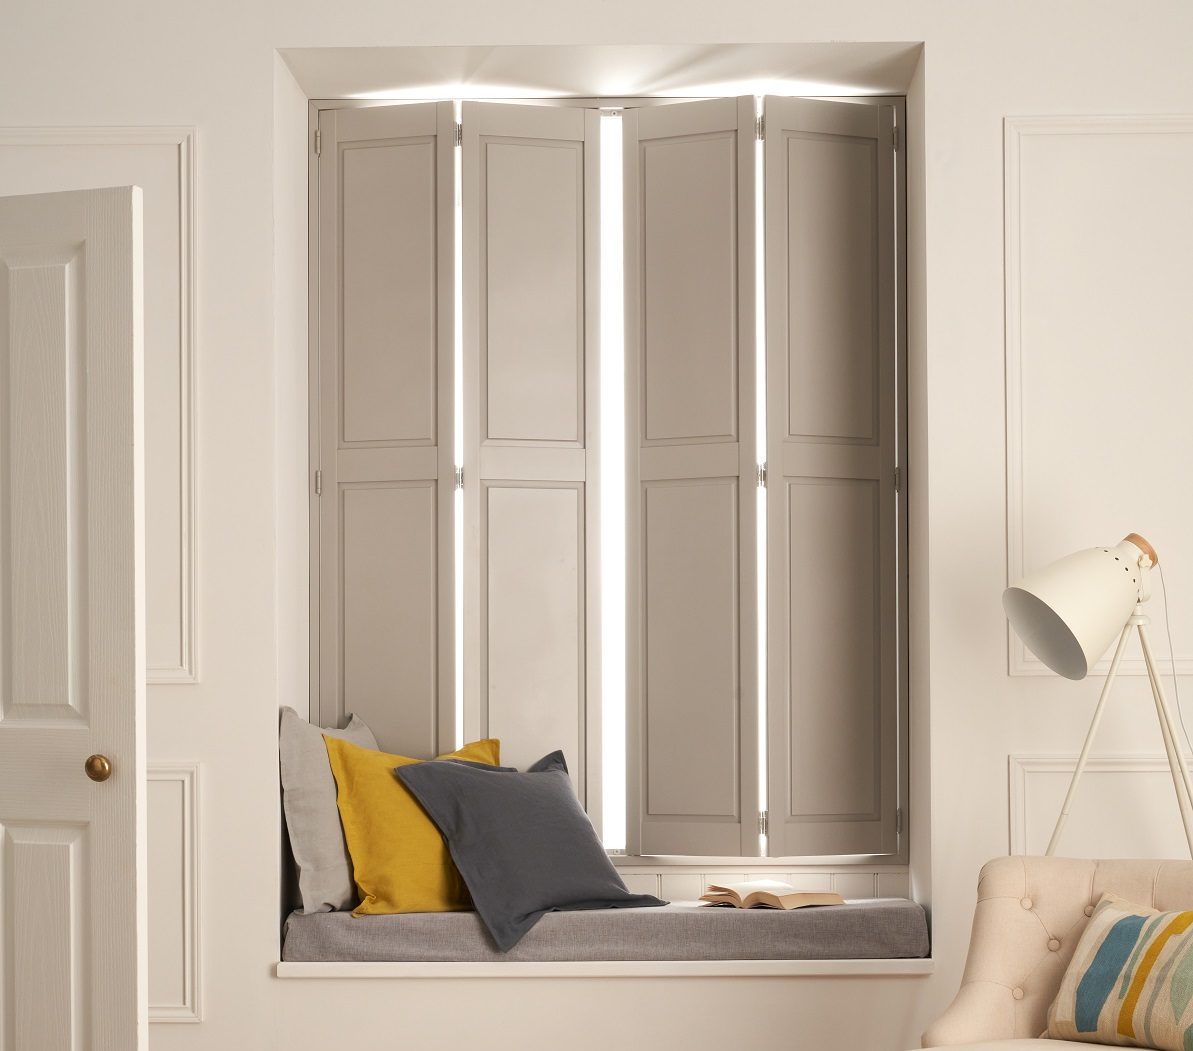 Solid shutters from Elite Blinds